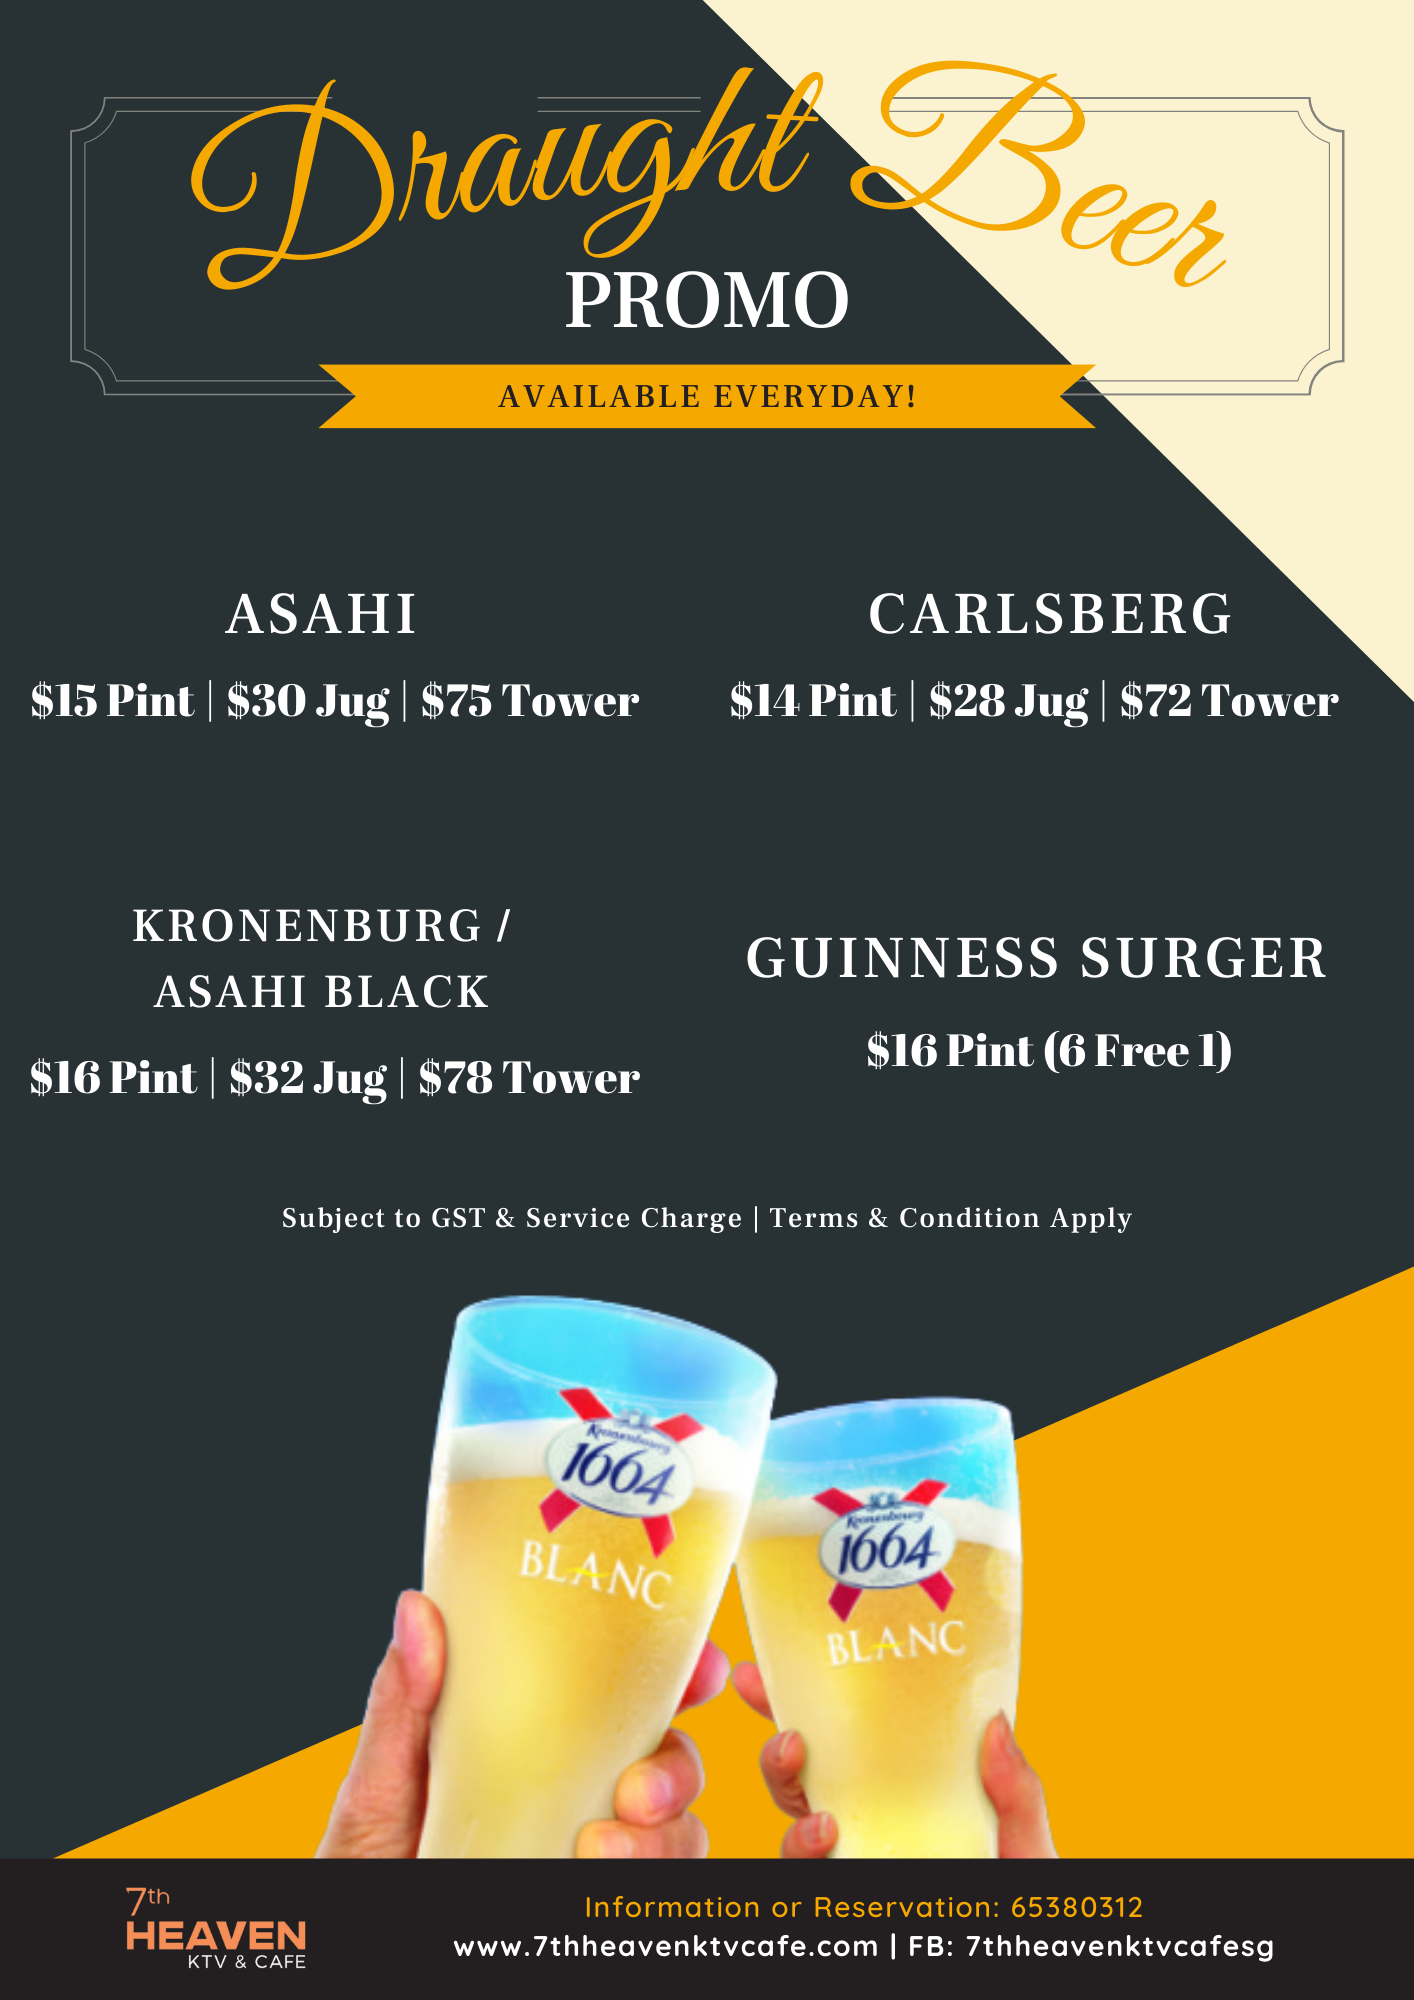 Draught Beer promo